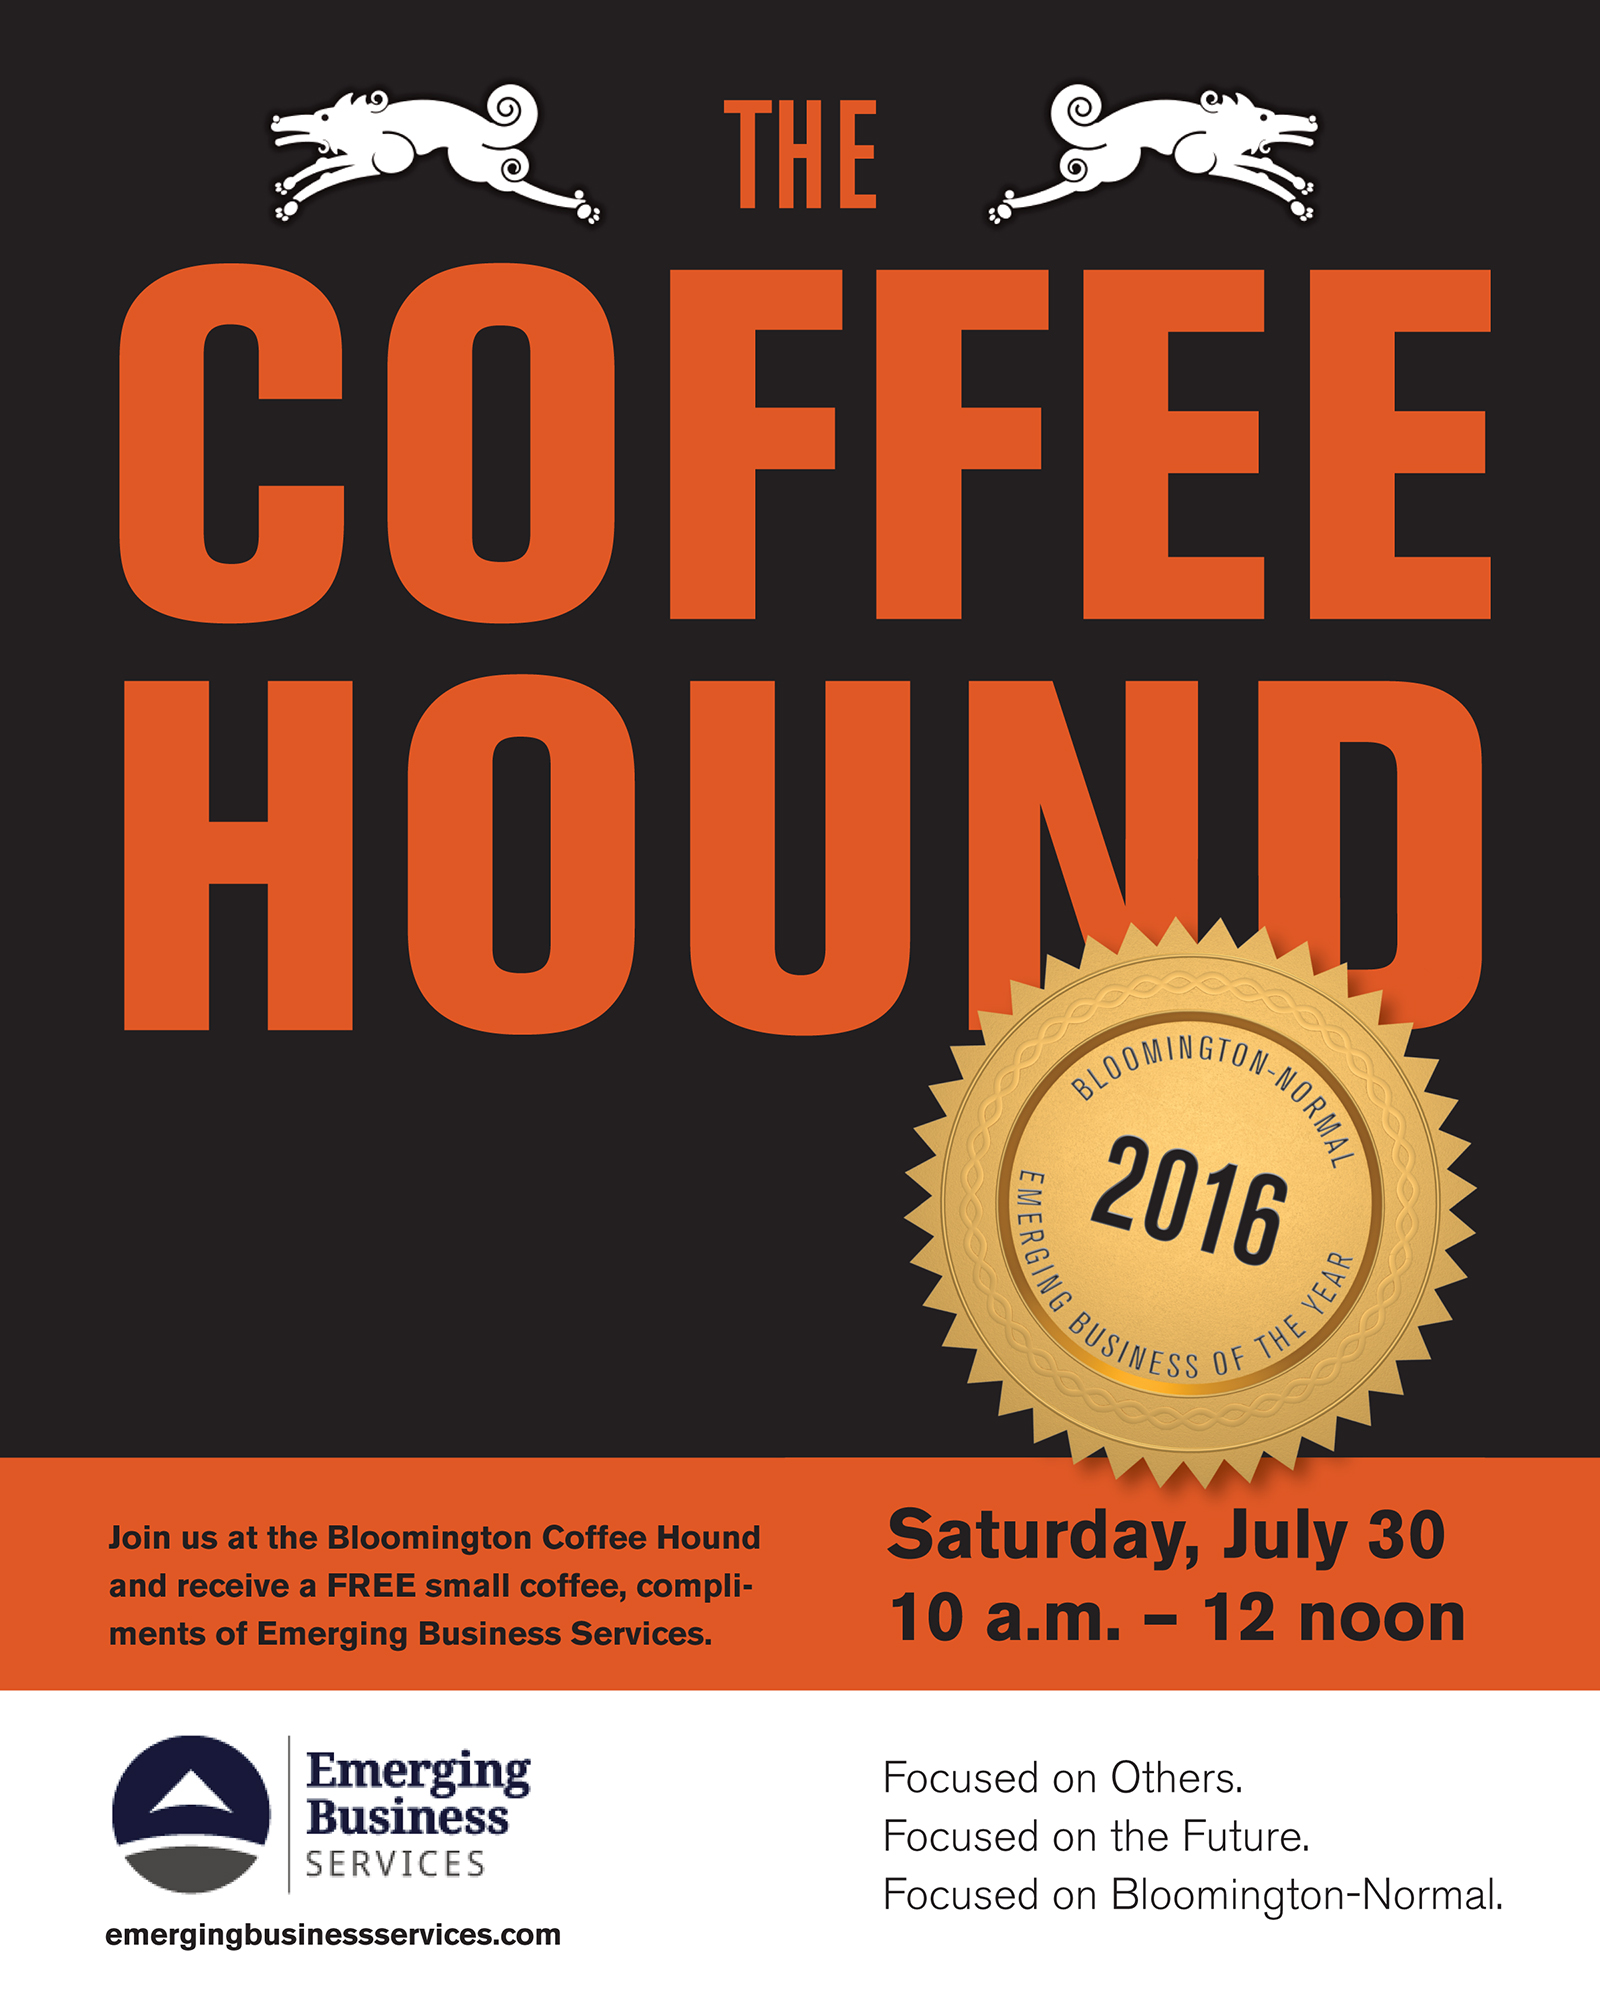 Coffee Hound Named “Emerging Business of the Year”!